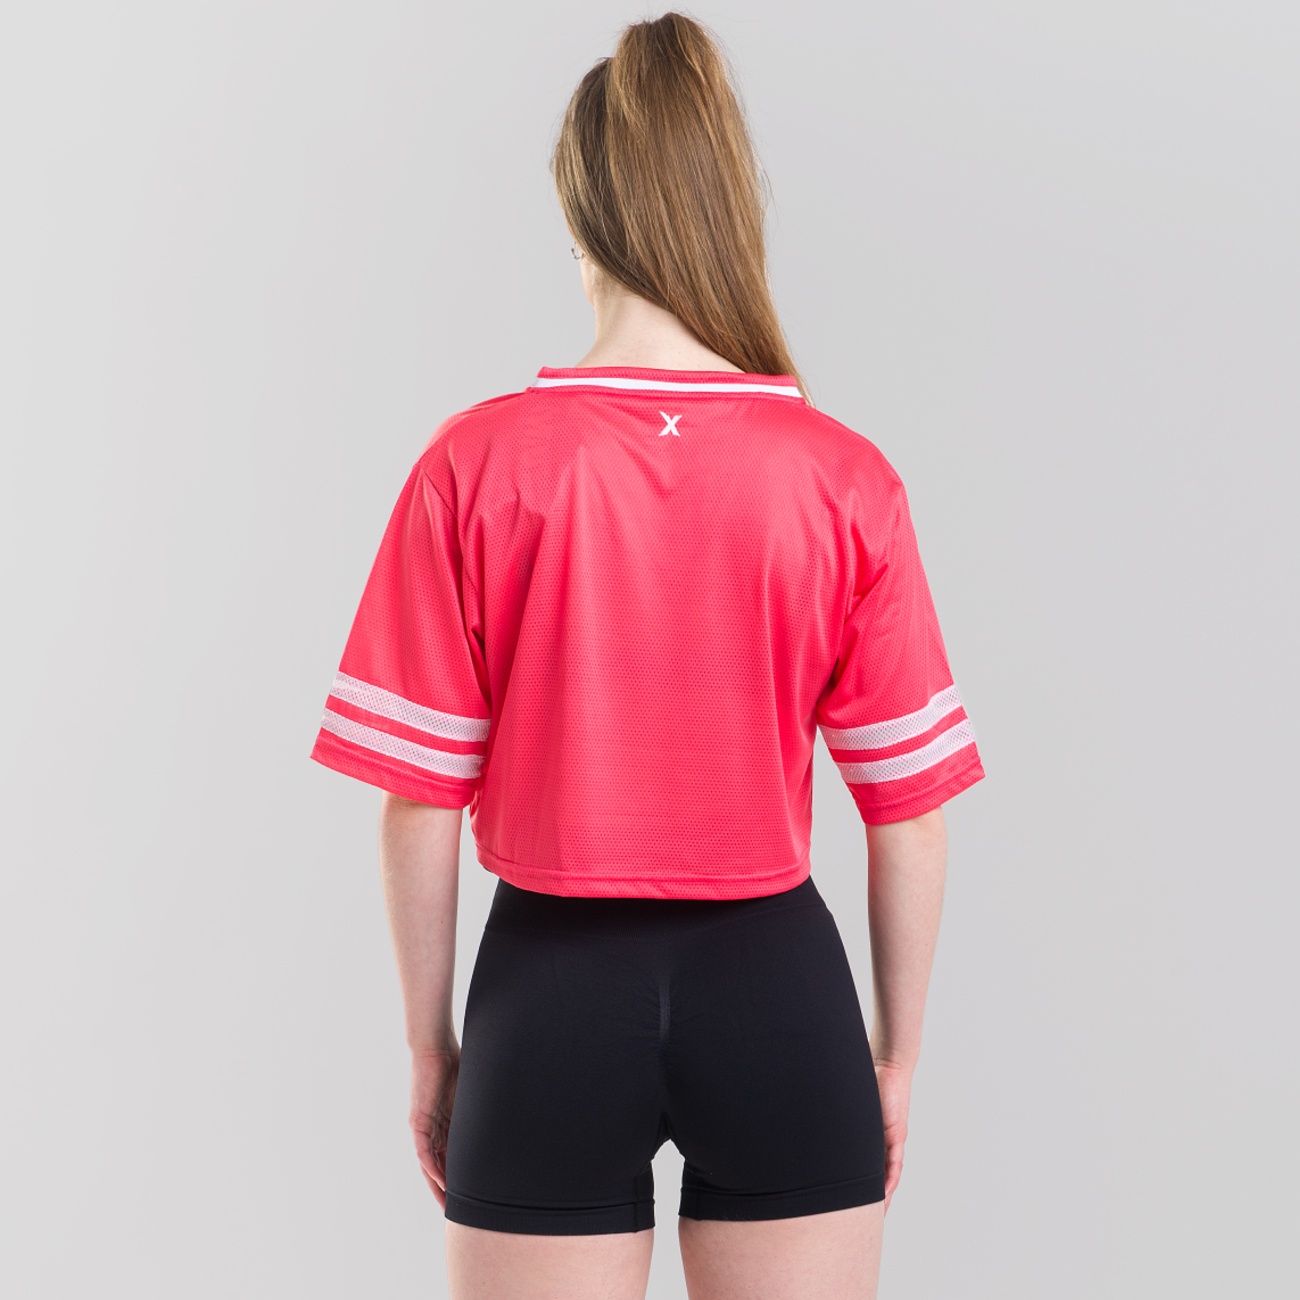 MNX-CROPPED-JERSEY-PINK-2